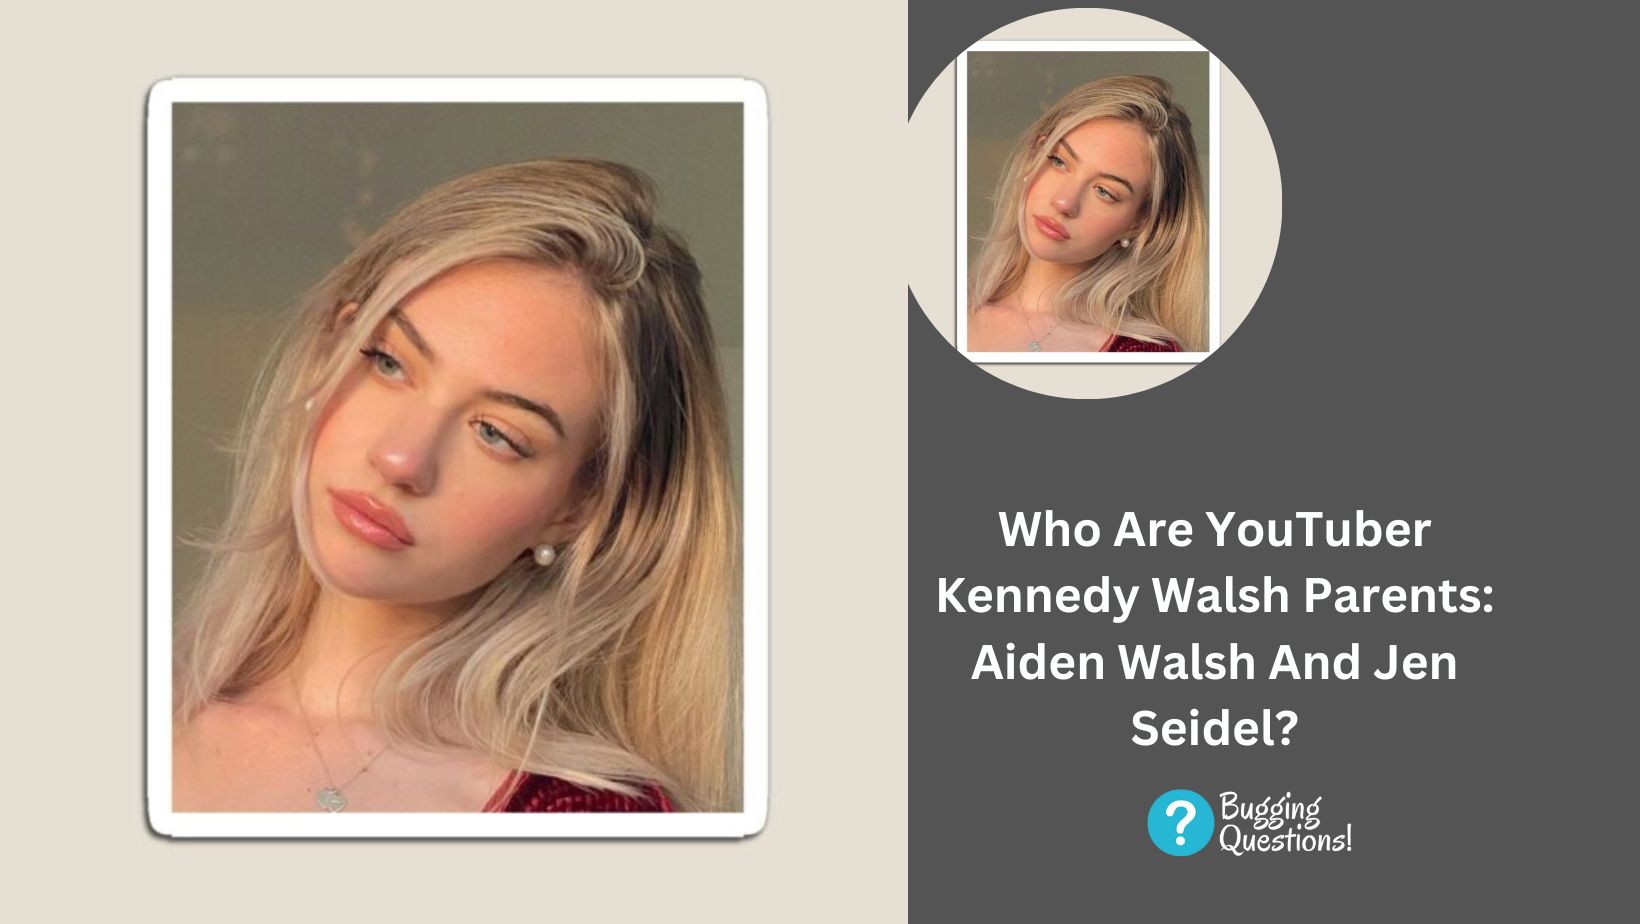 Who Are YouTuber Kennedy Walsh Parents: Aiden Walsh And Jen Seidel?